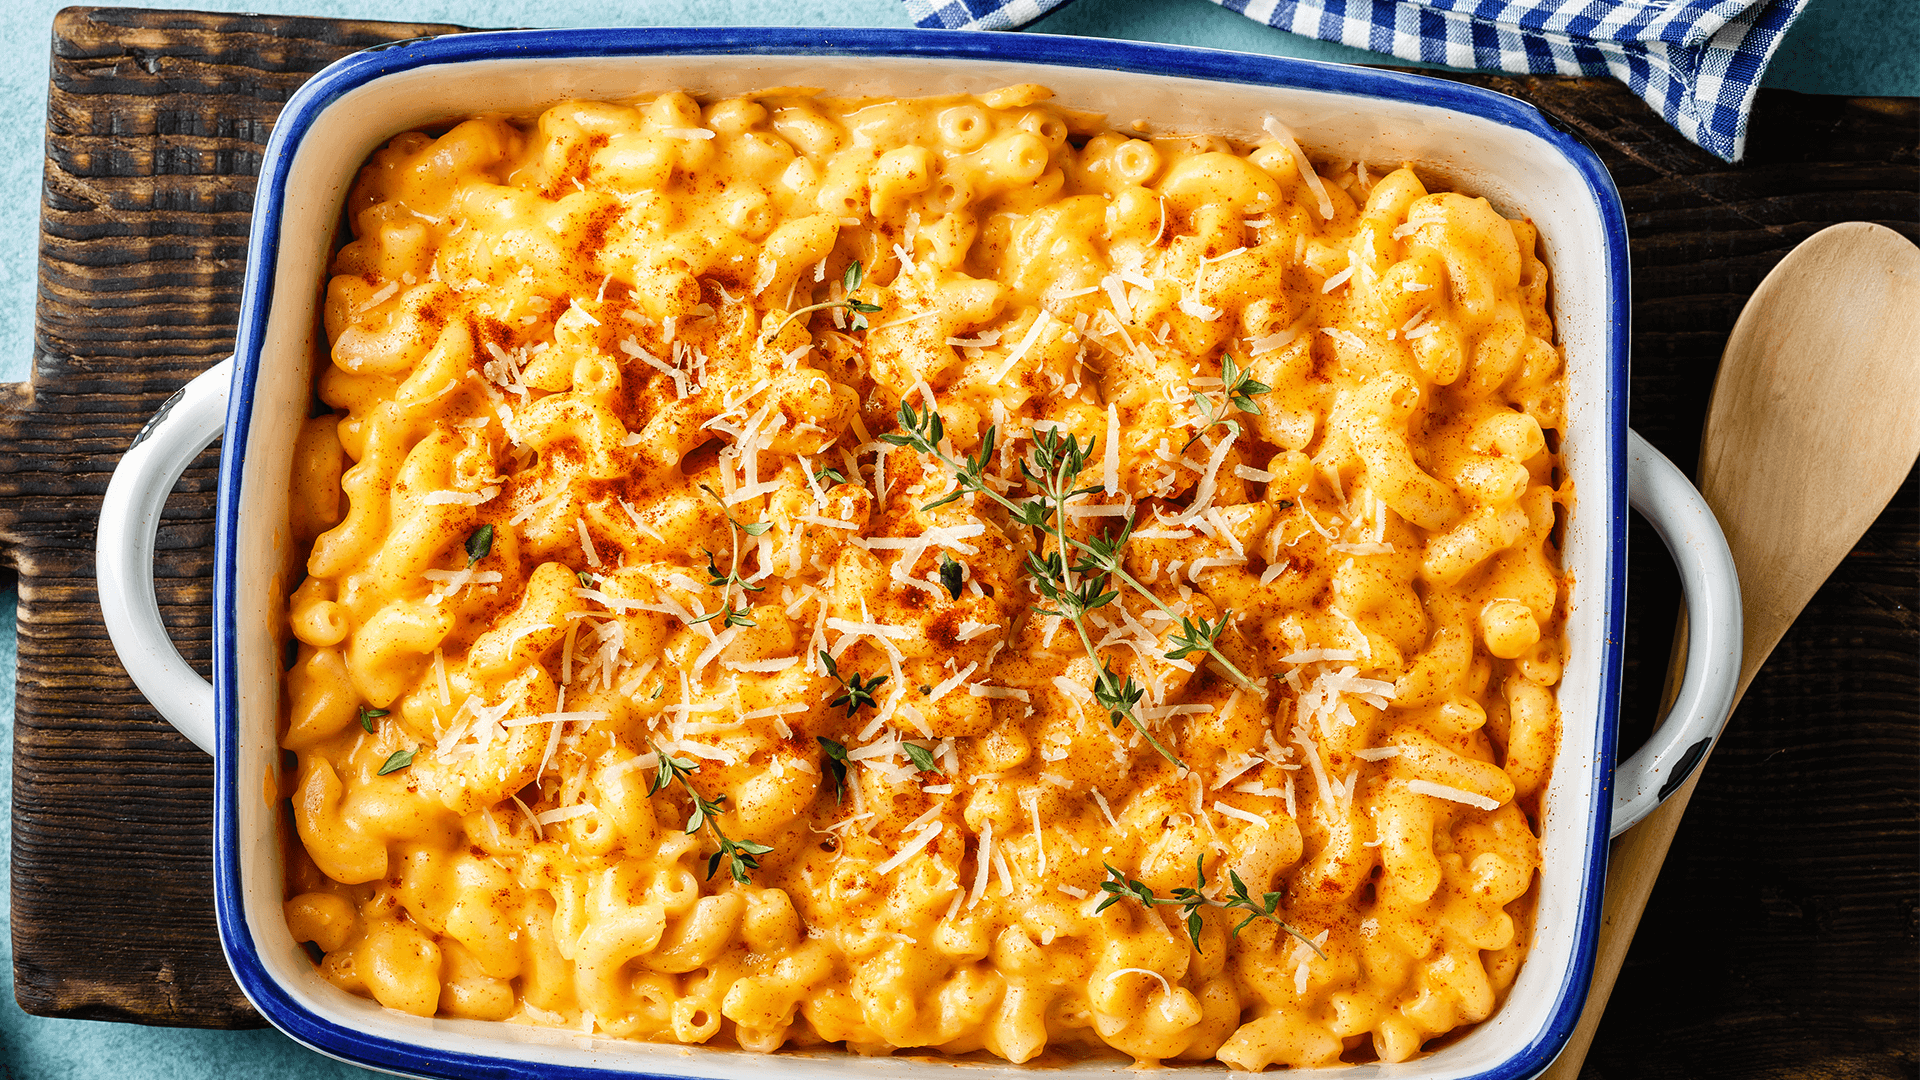 Lactose free Old Fashioned Mac and Cheese made with LACTAID ®.